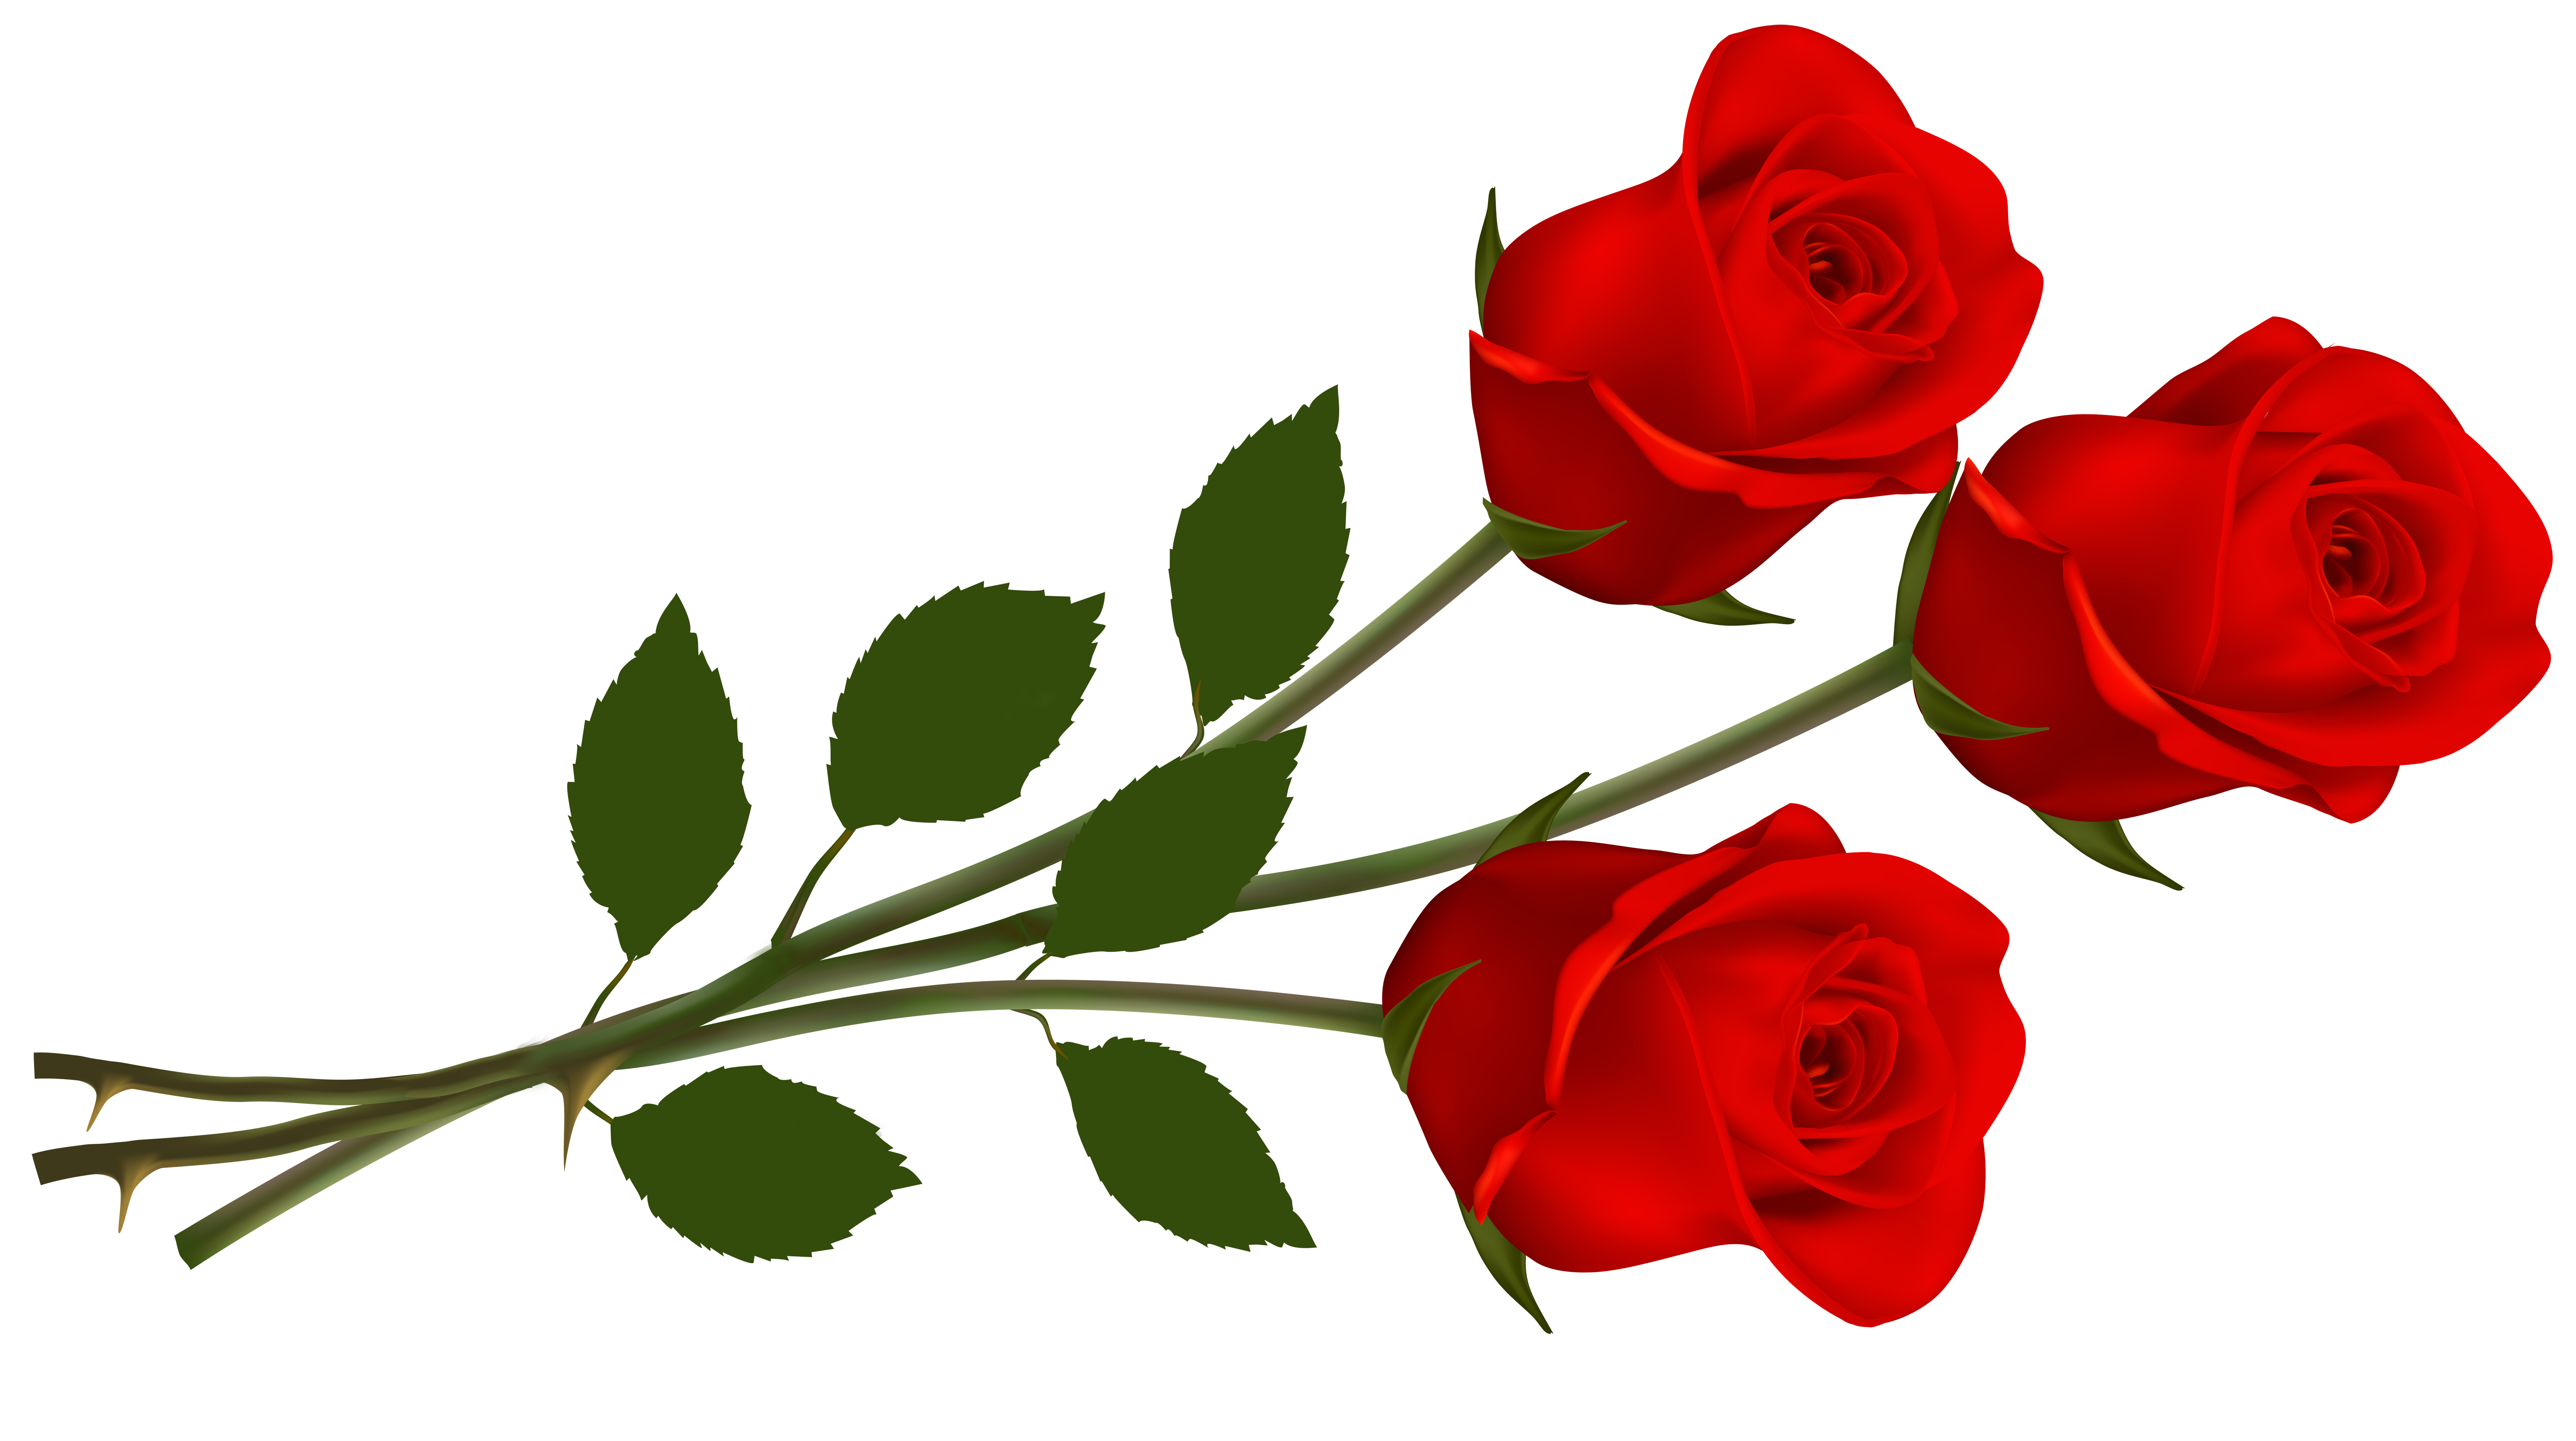 red red rose clipart ...